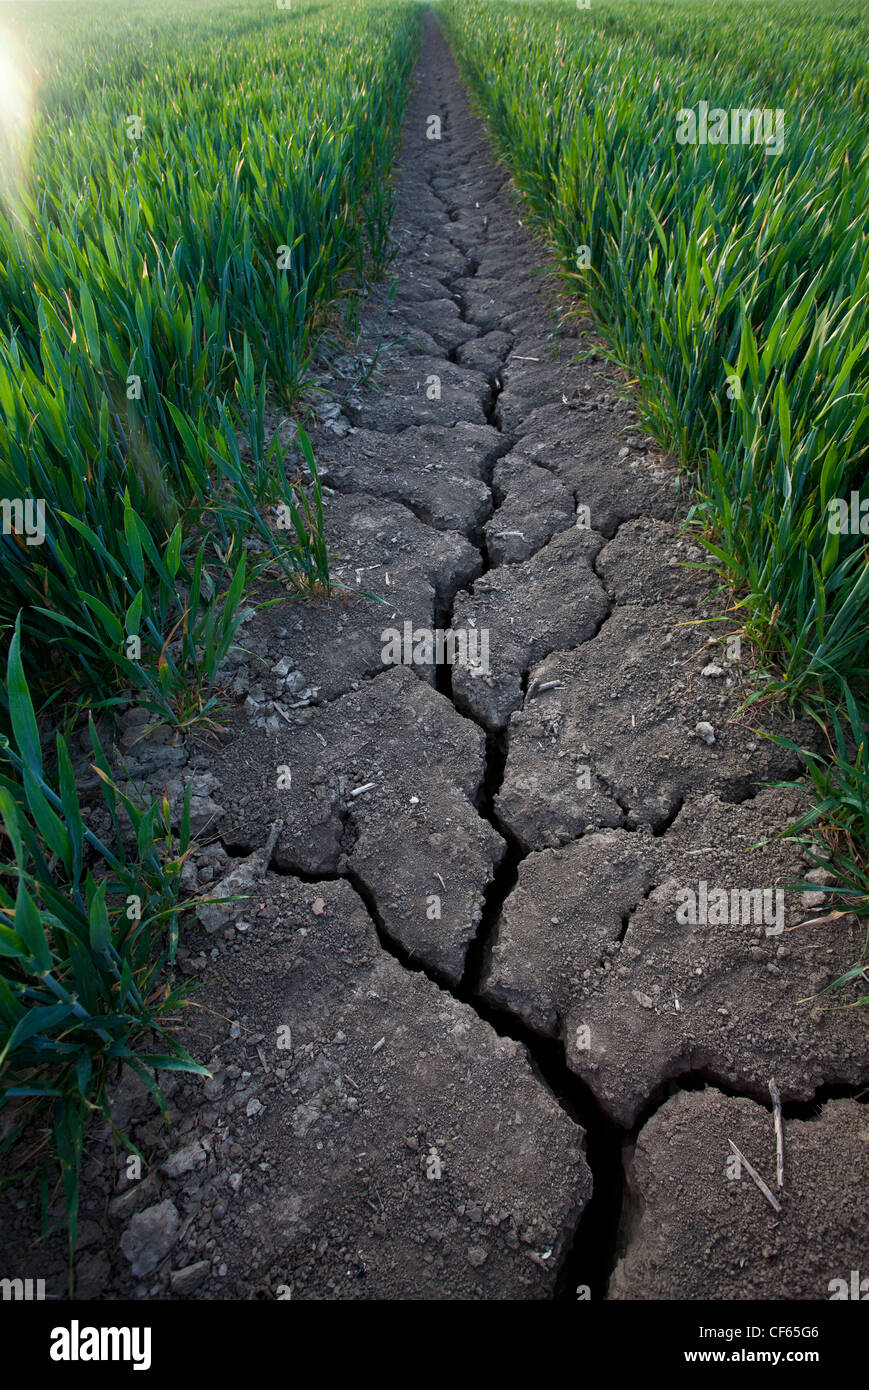 Cracked earth along a tractor track in a field of wheat. Stock Photo